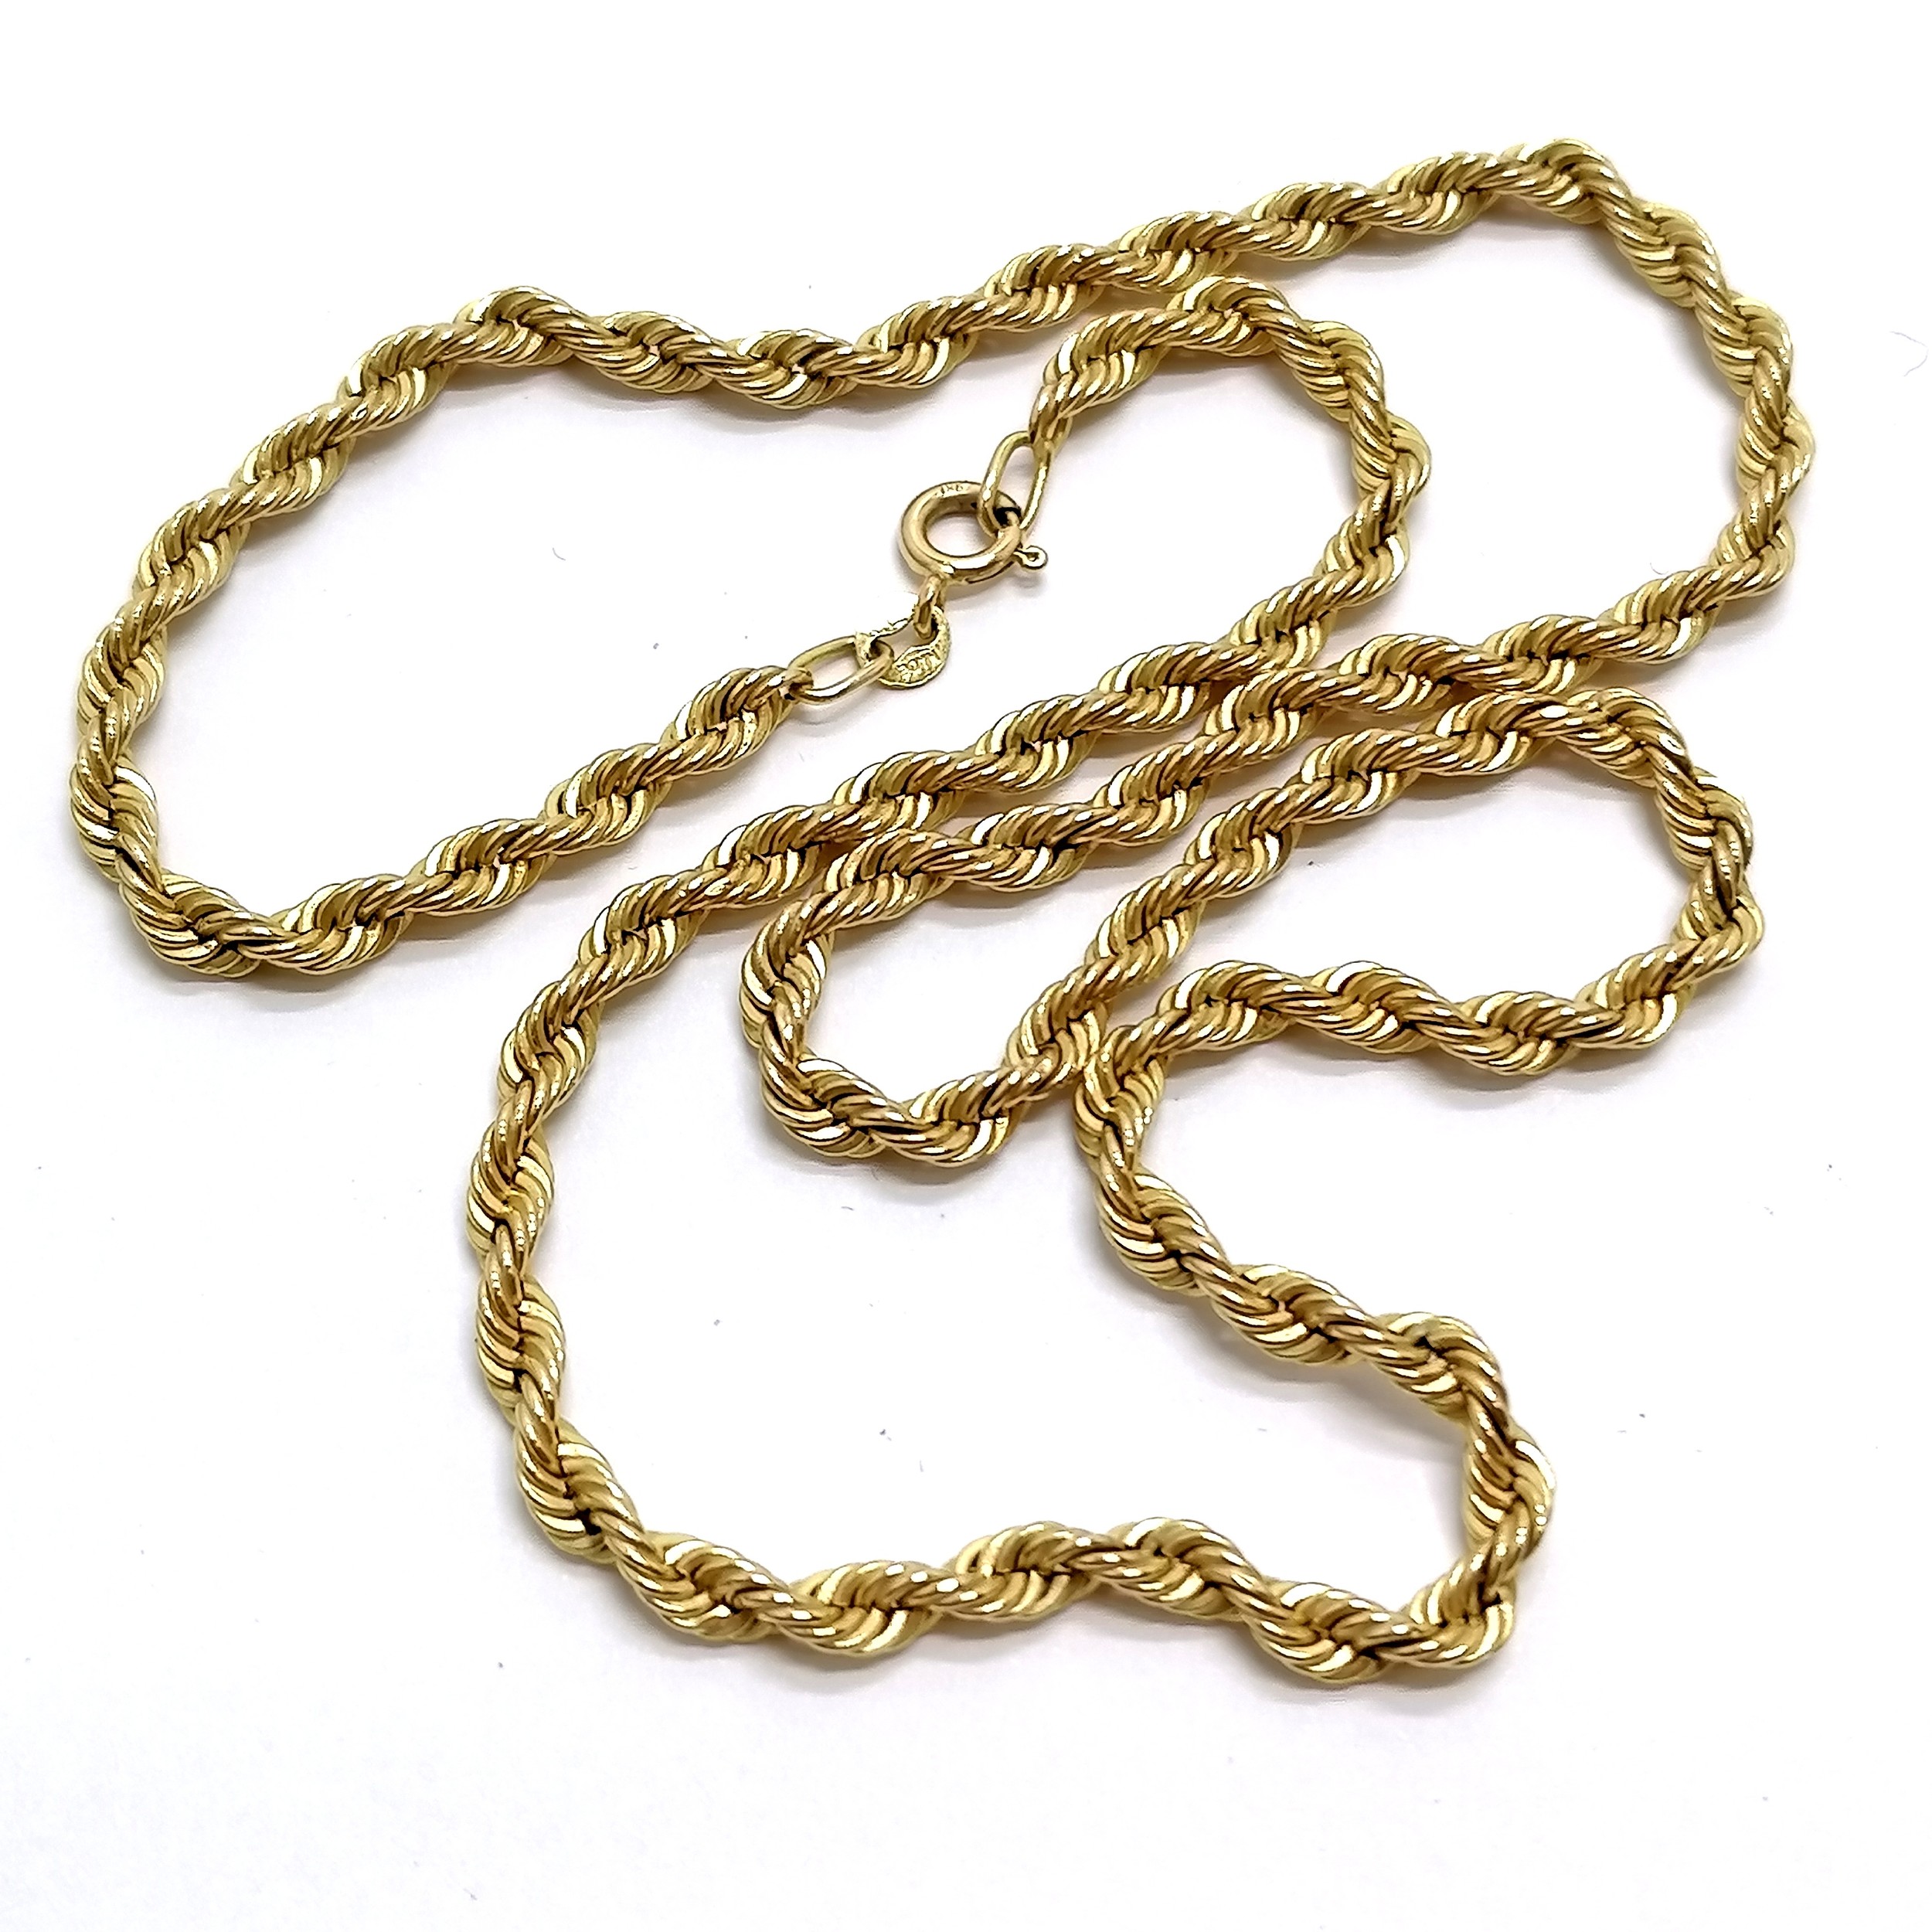 9ct hallmarked gold rope 50cm neckchain - 6.4g - SOLD ON BEHALF OF THE NEW BREAST CANCER UNIT APPEAL - Image 2 of 2